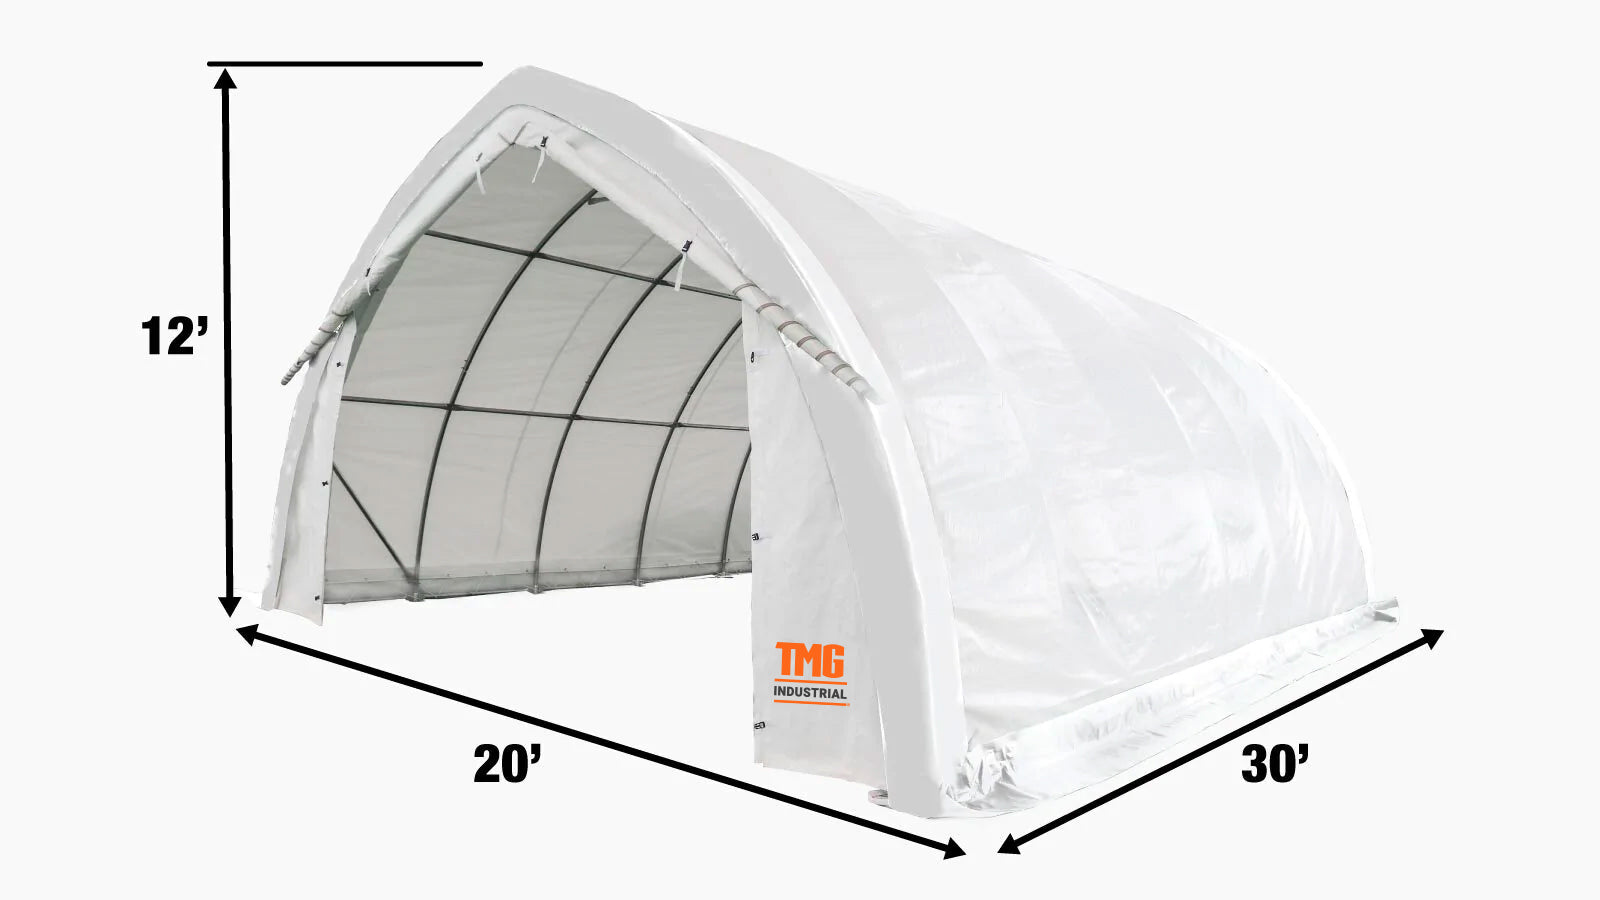 TMG Industrial 20' x 30' Arch Wall Peak Ceiling Storage Shelter with Heavy Duty 11 oz PE Cover & Drive Through Doors, TMG-ST2031P (Previously ST2030P)-specifications-image